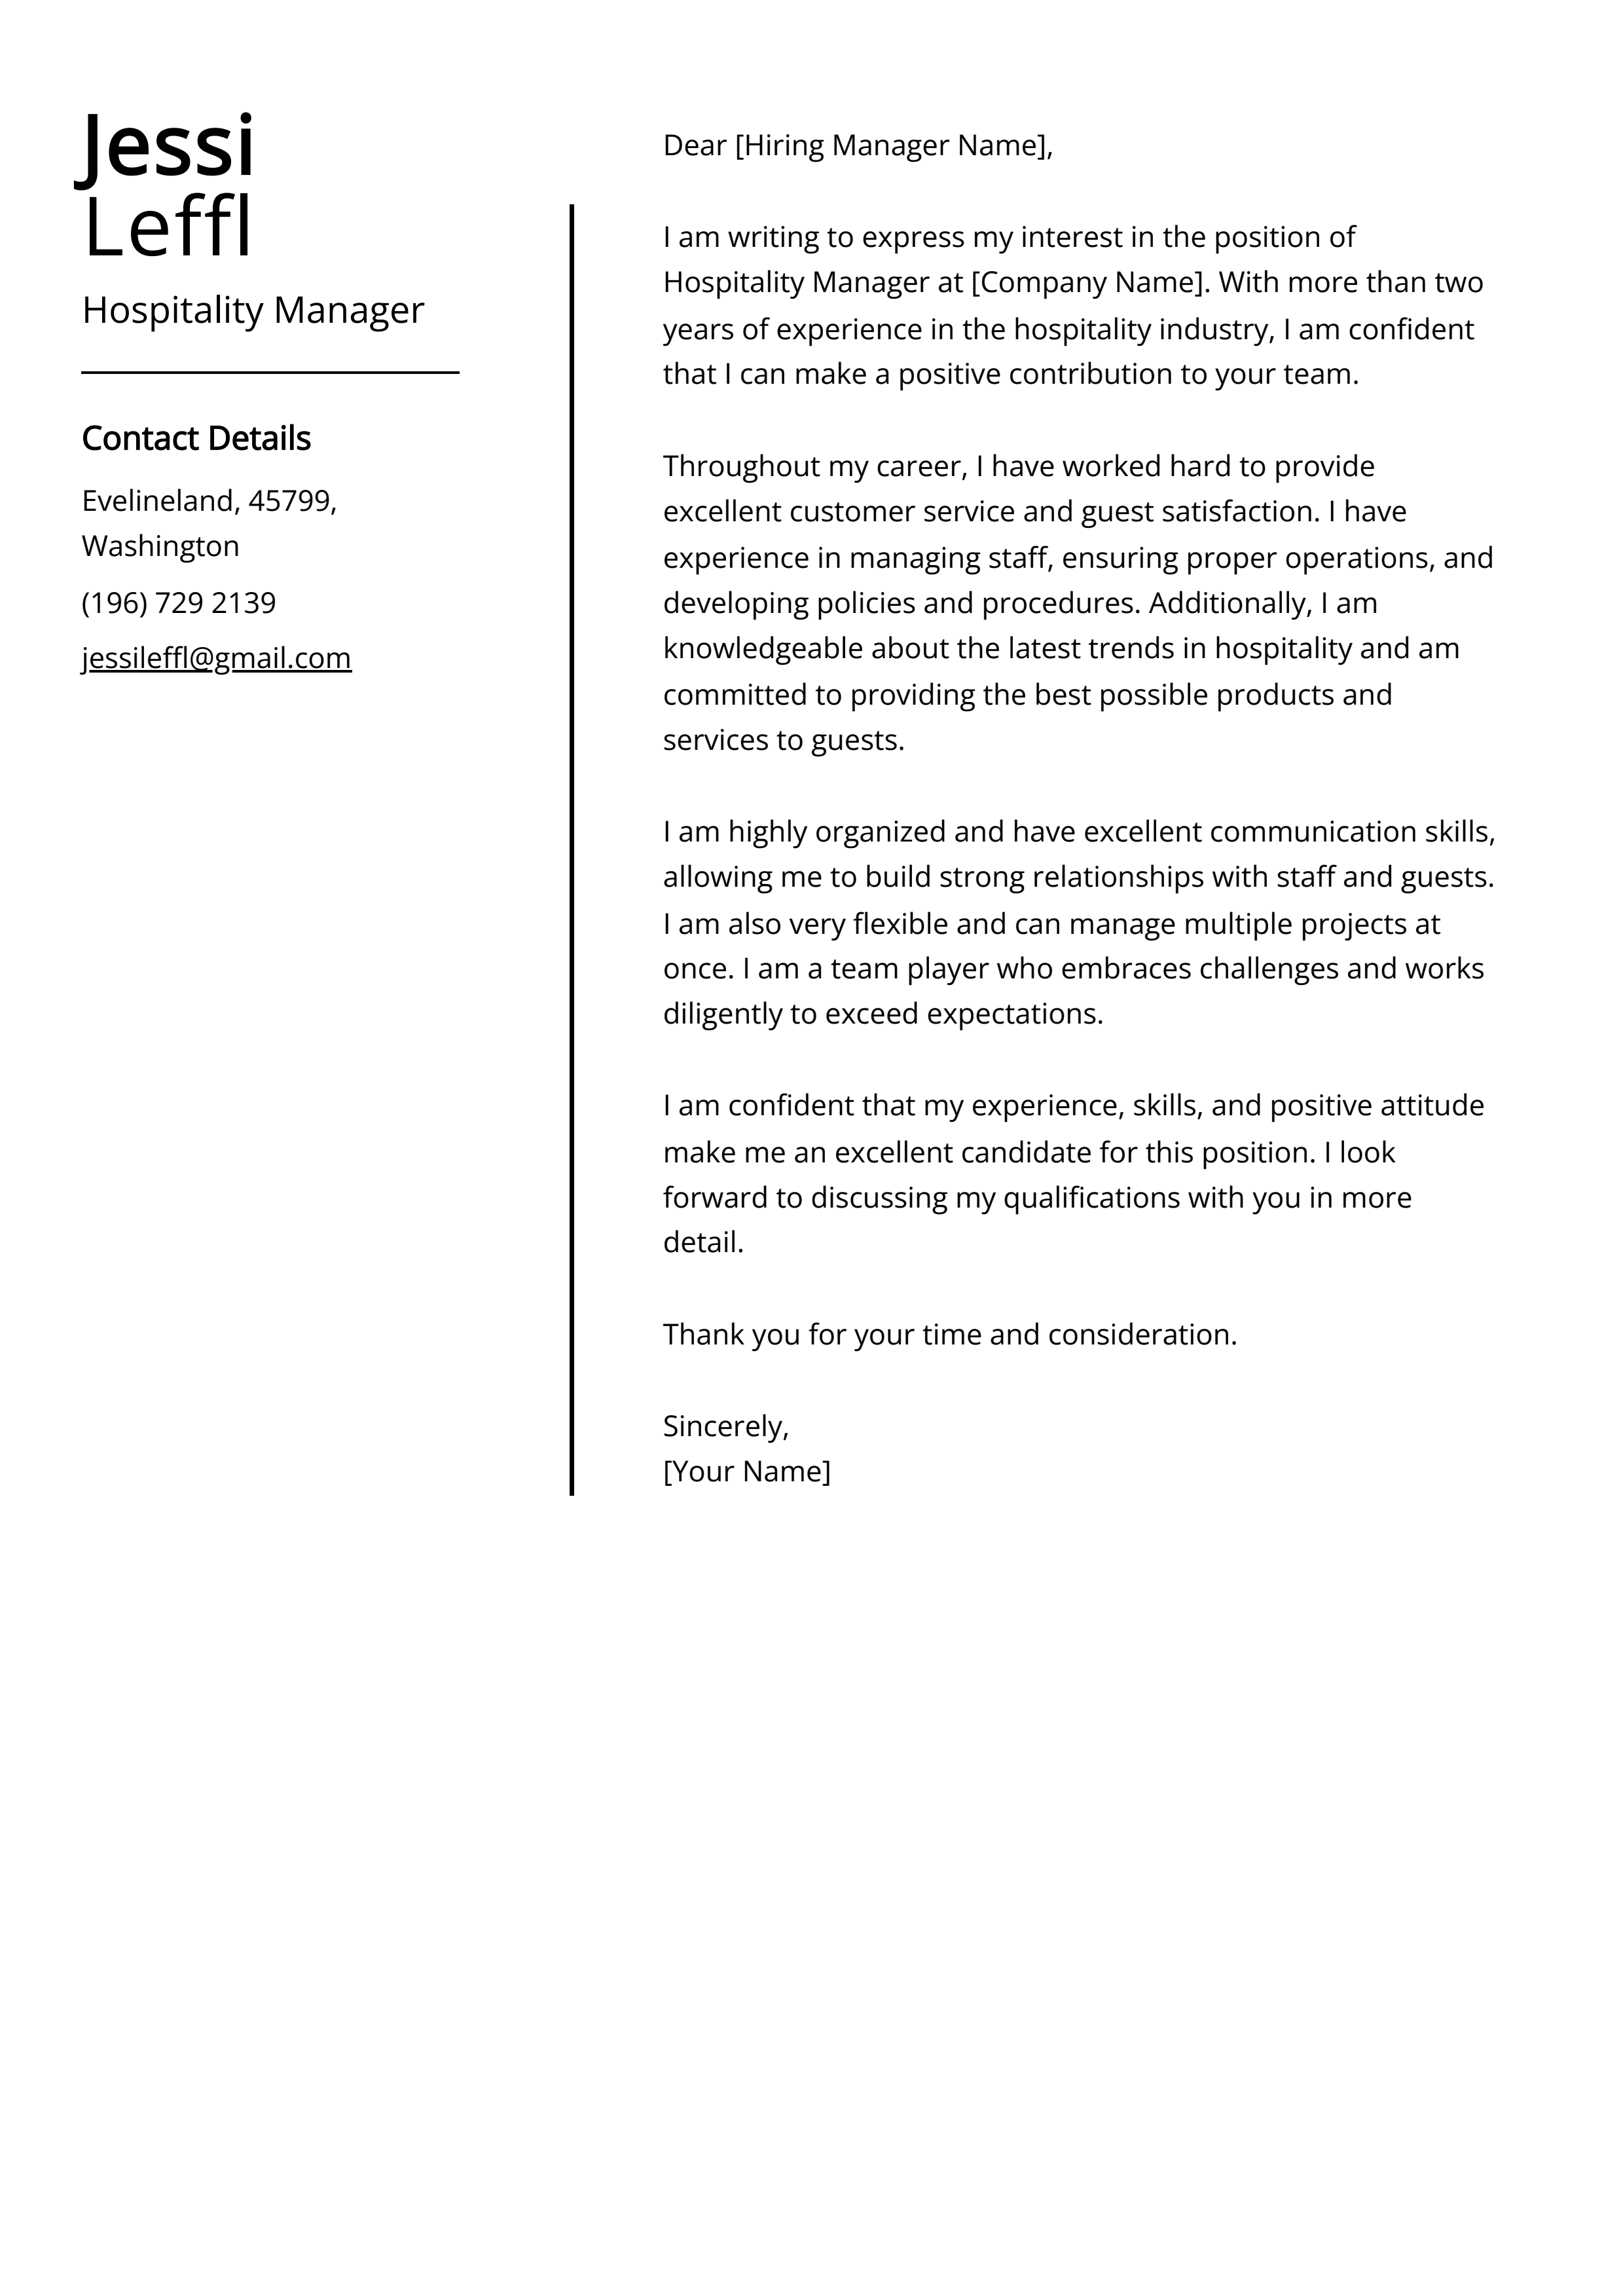 Hospitality Manager Cover Letter Example